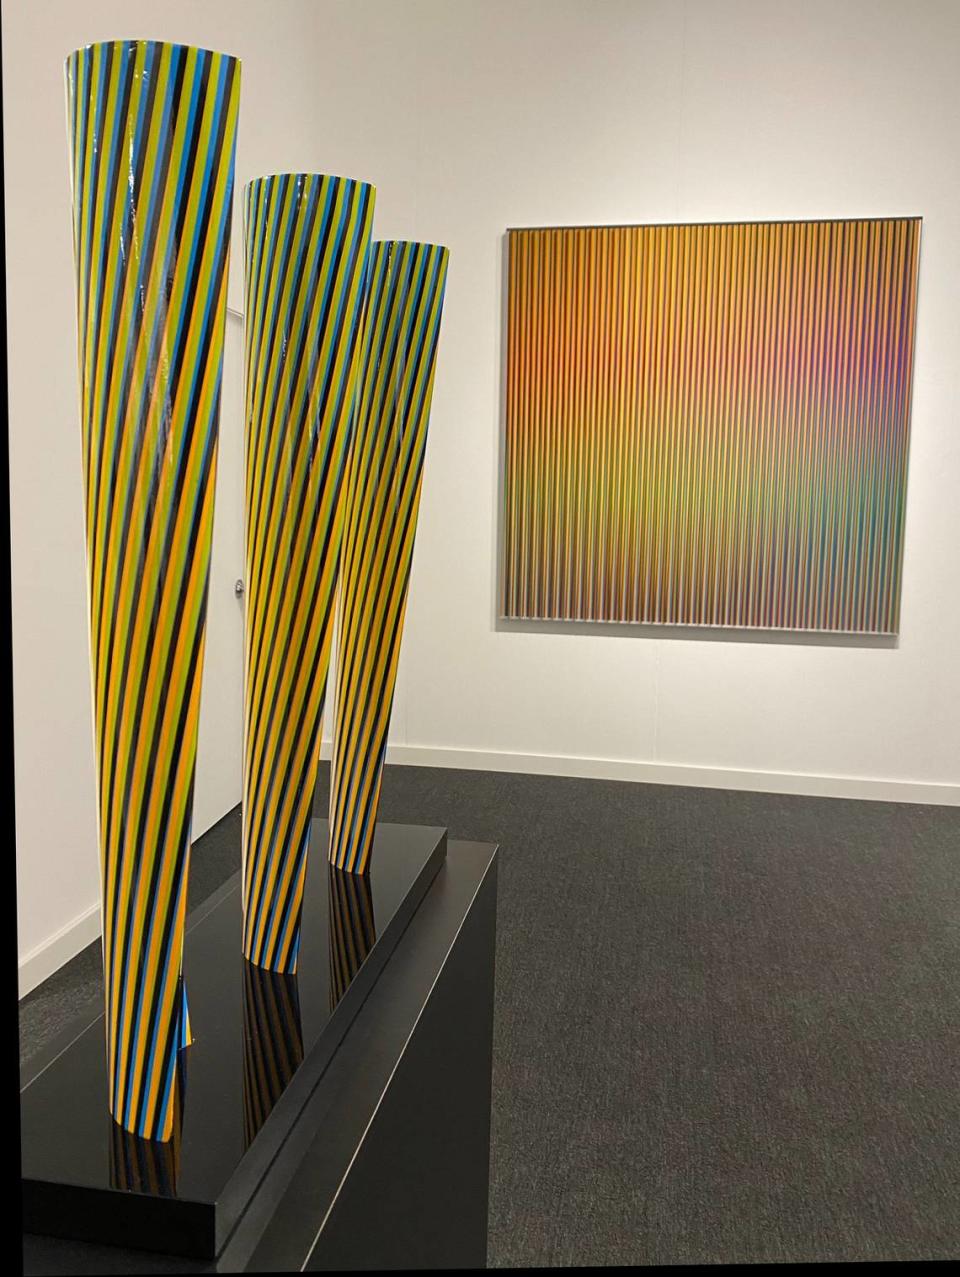 Sculptures and wallpieces by Carlos Cruz-Diez fill the 2021 booth of Galeries Bartoux at Art Miami.